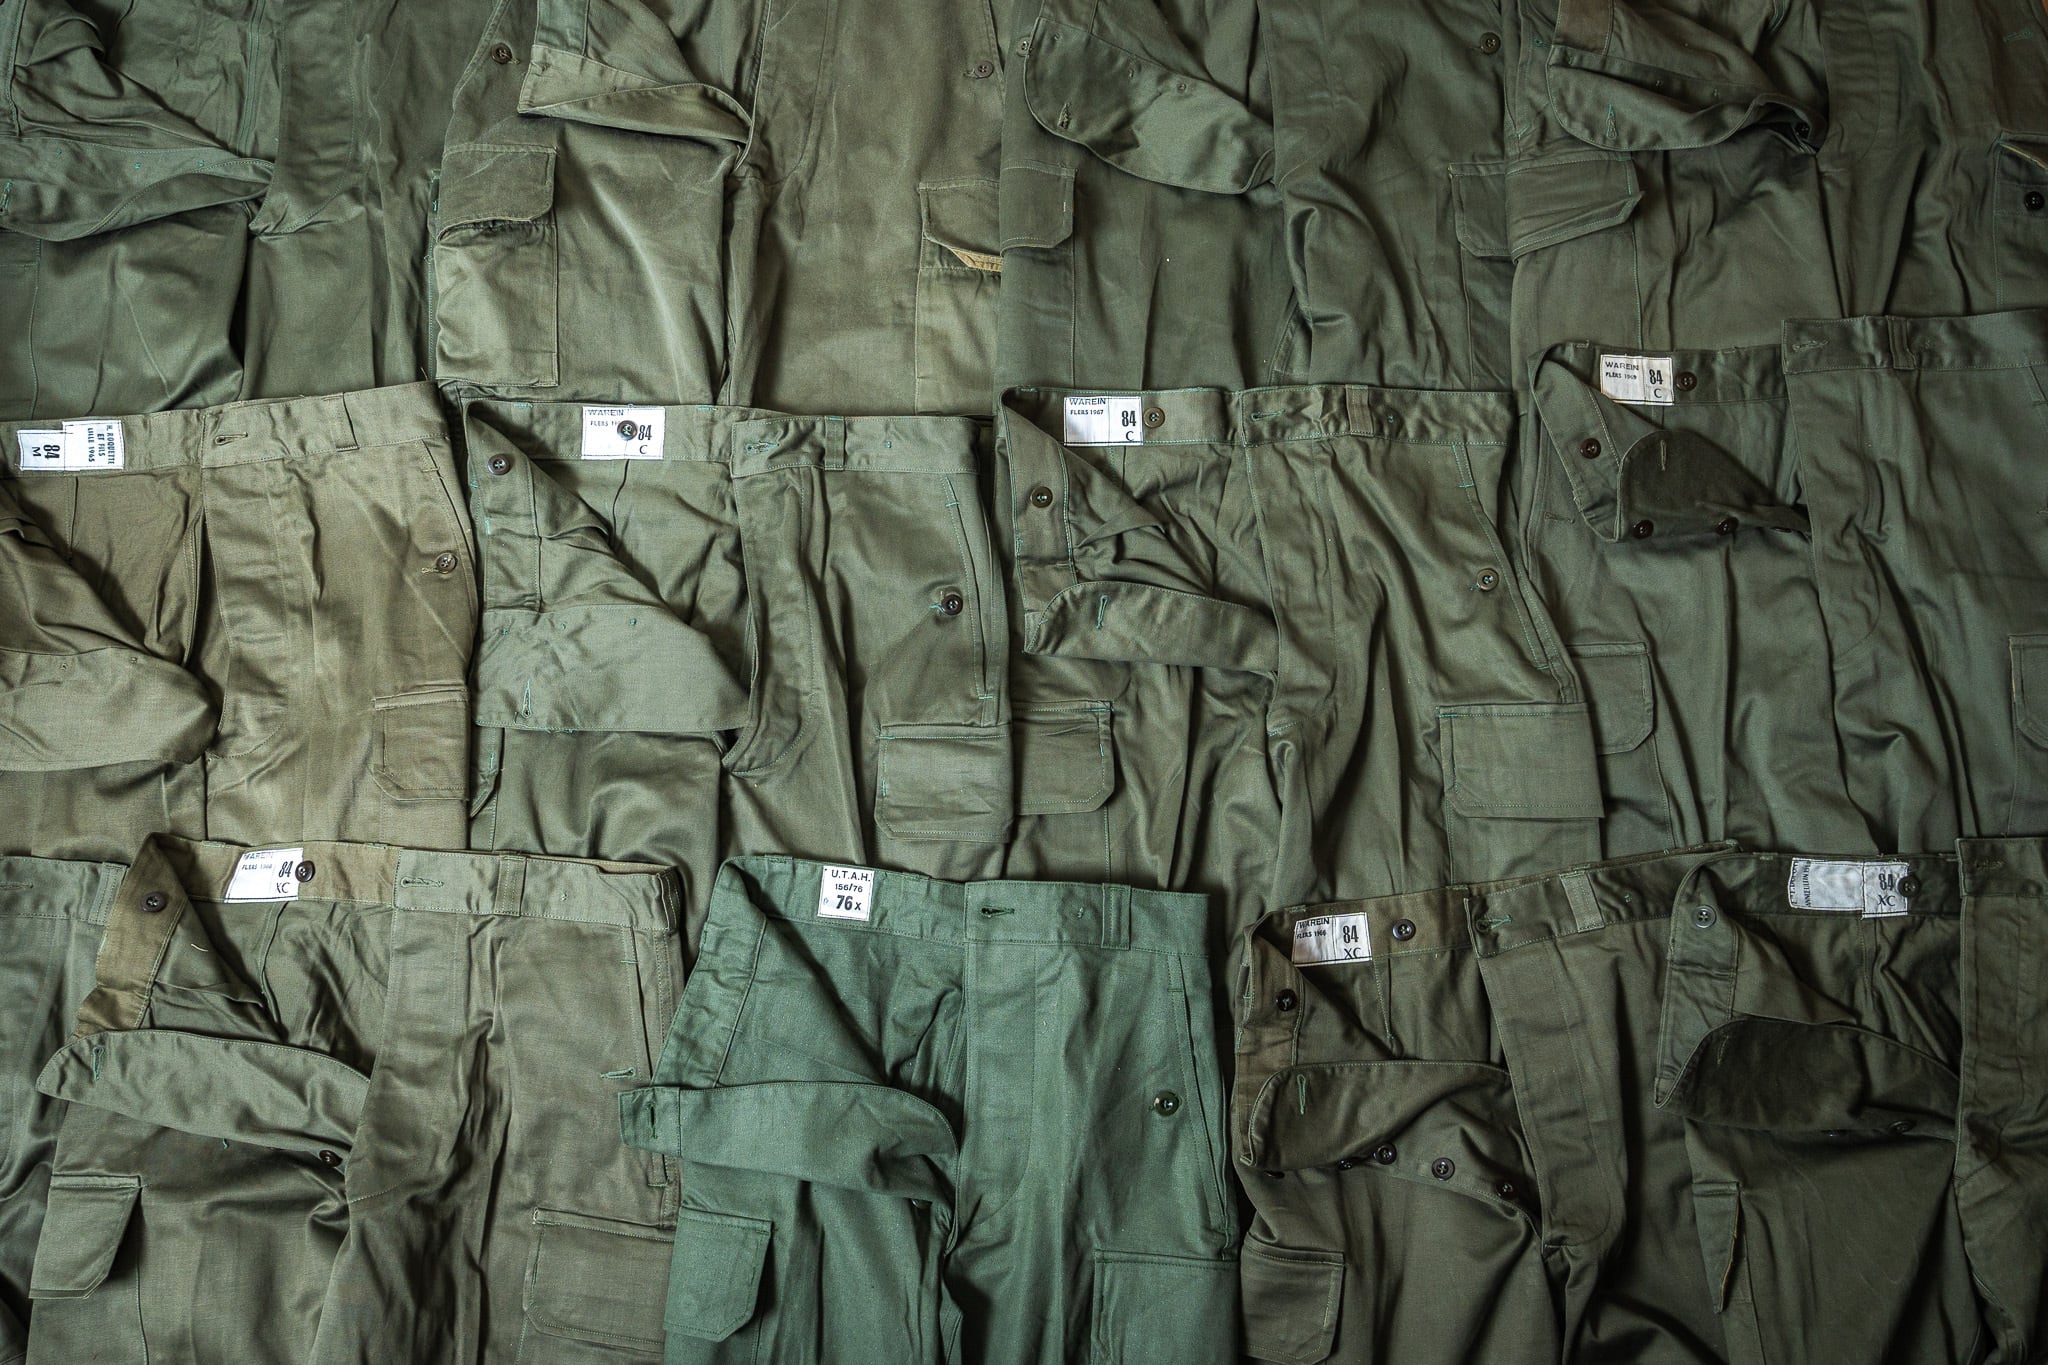 DEADSTOCK】French Army M-64 Field Trousers デッドストック フランス